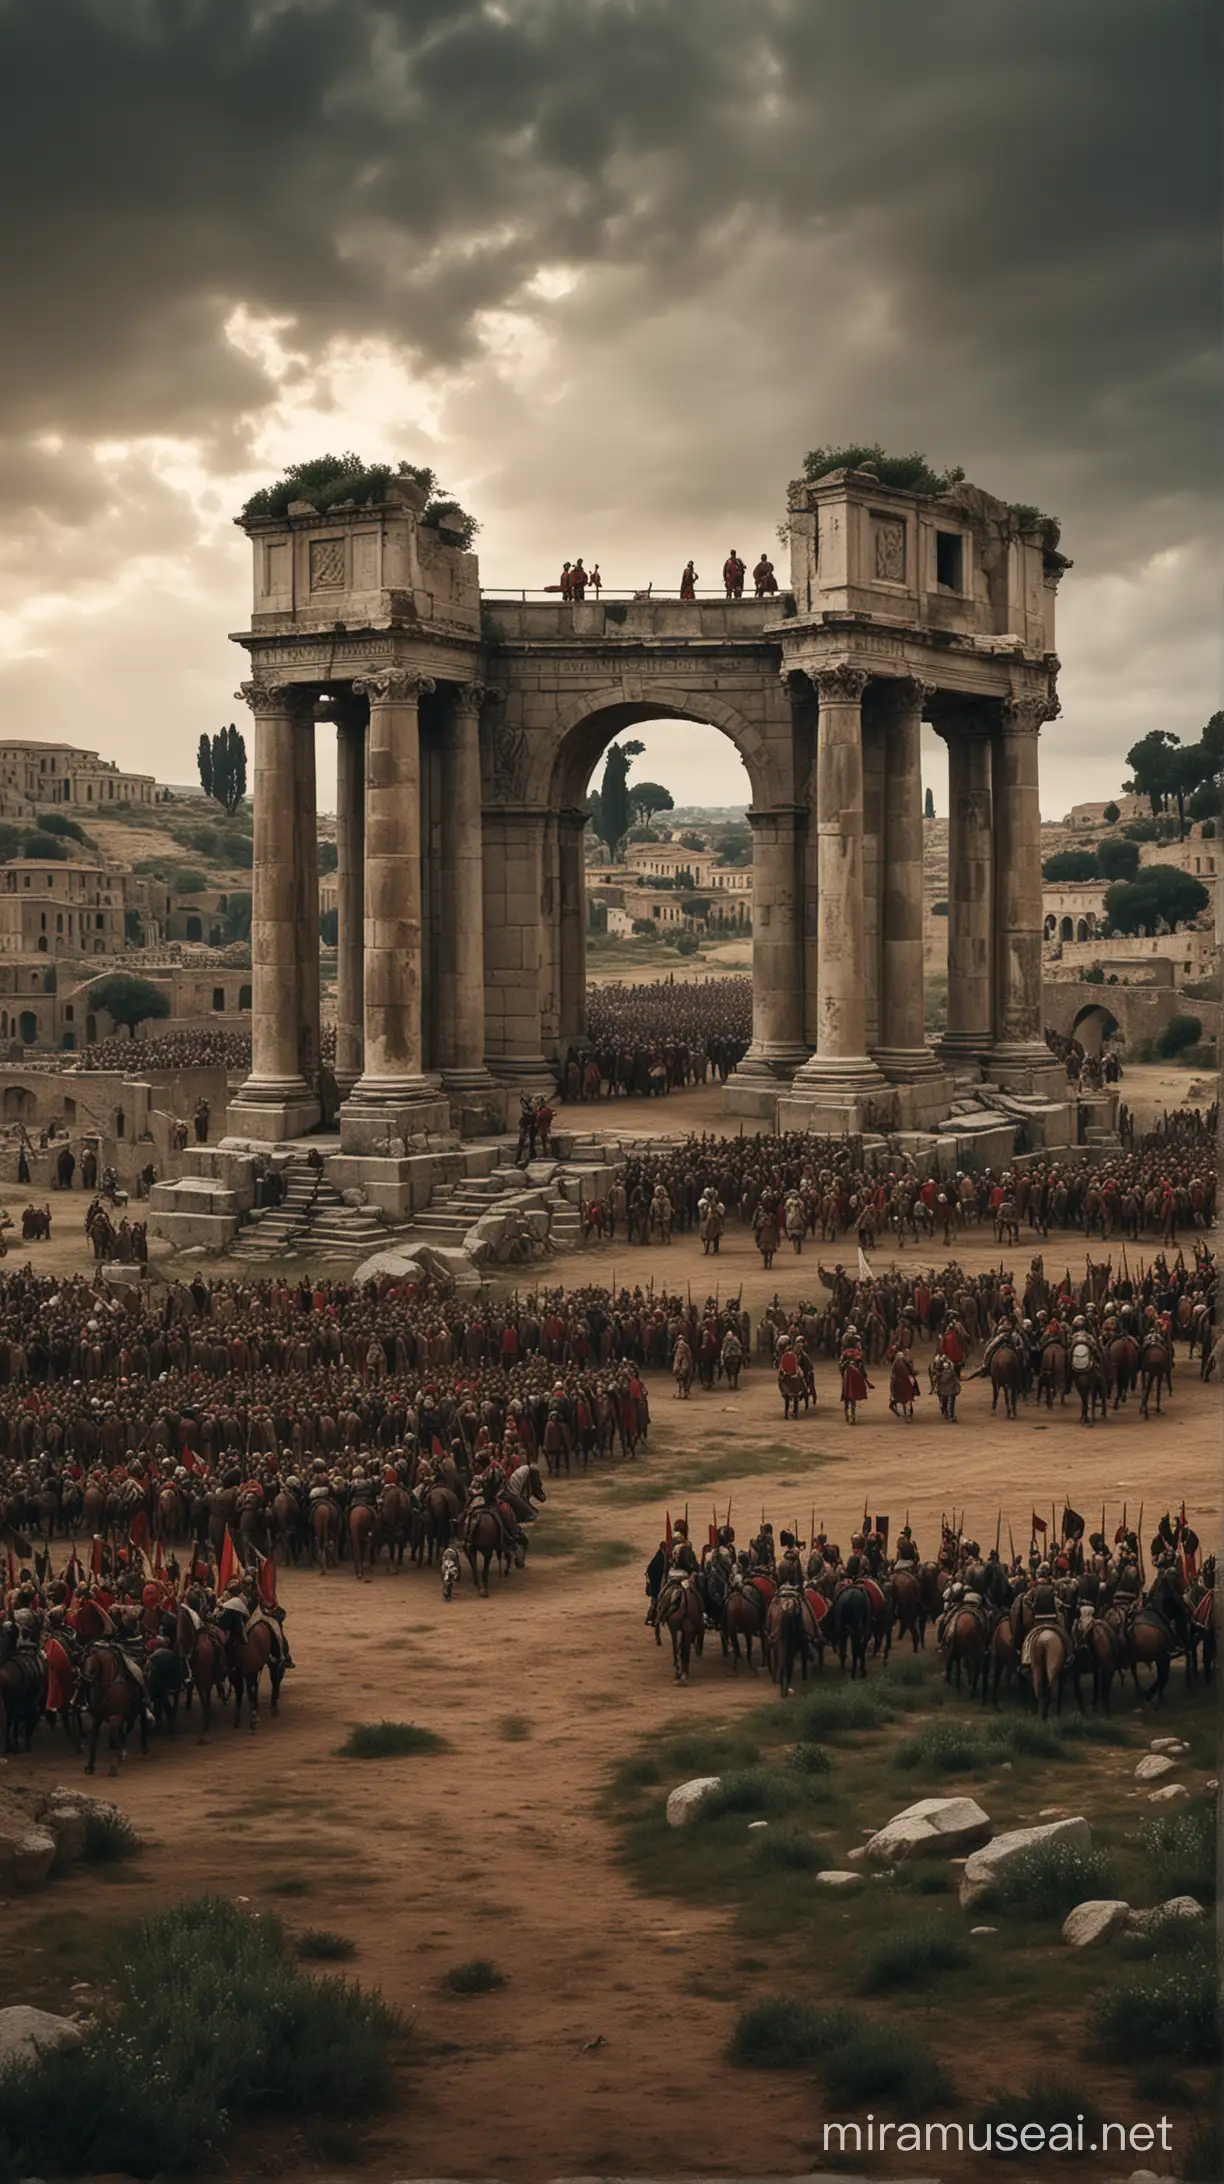 Include visual cues such as Roman architecture, military insignias, and scenes of battle to convey the escalating conflict between Octavia and Antony in moody background